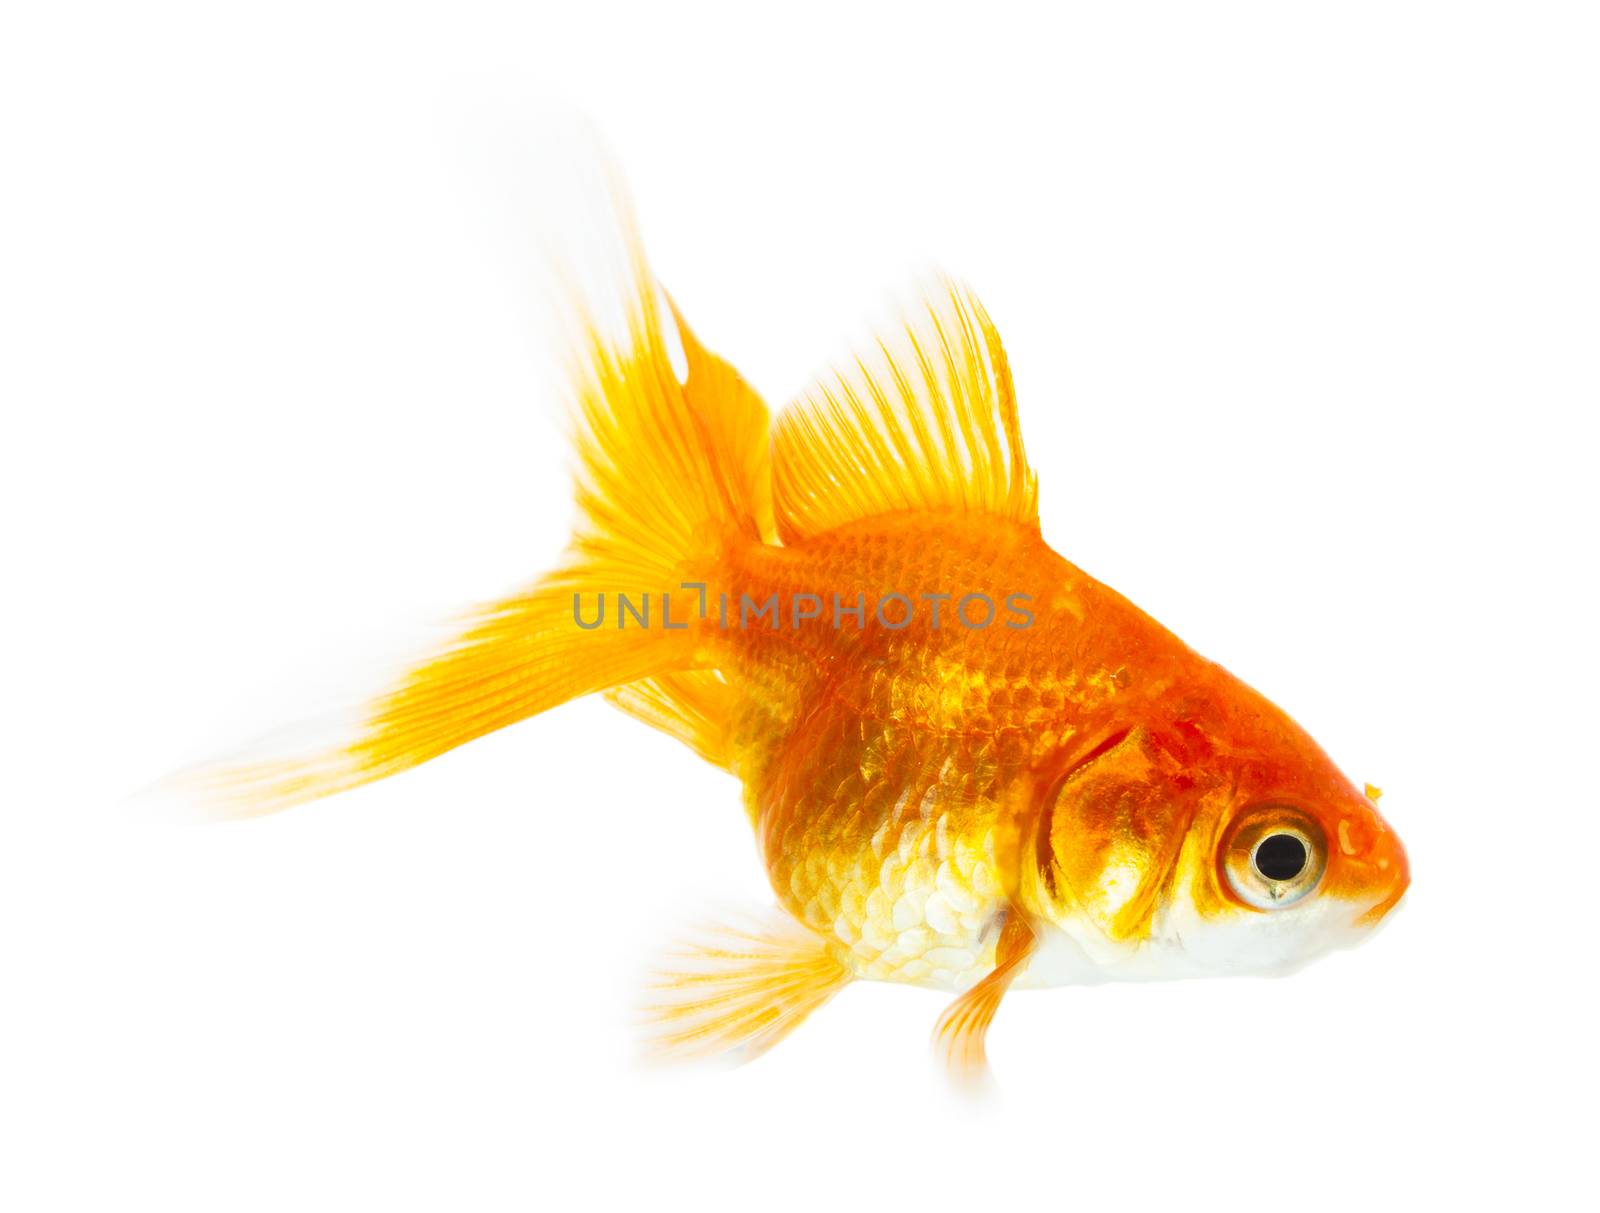 Gold fish isolated on white